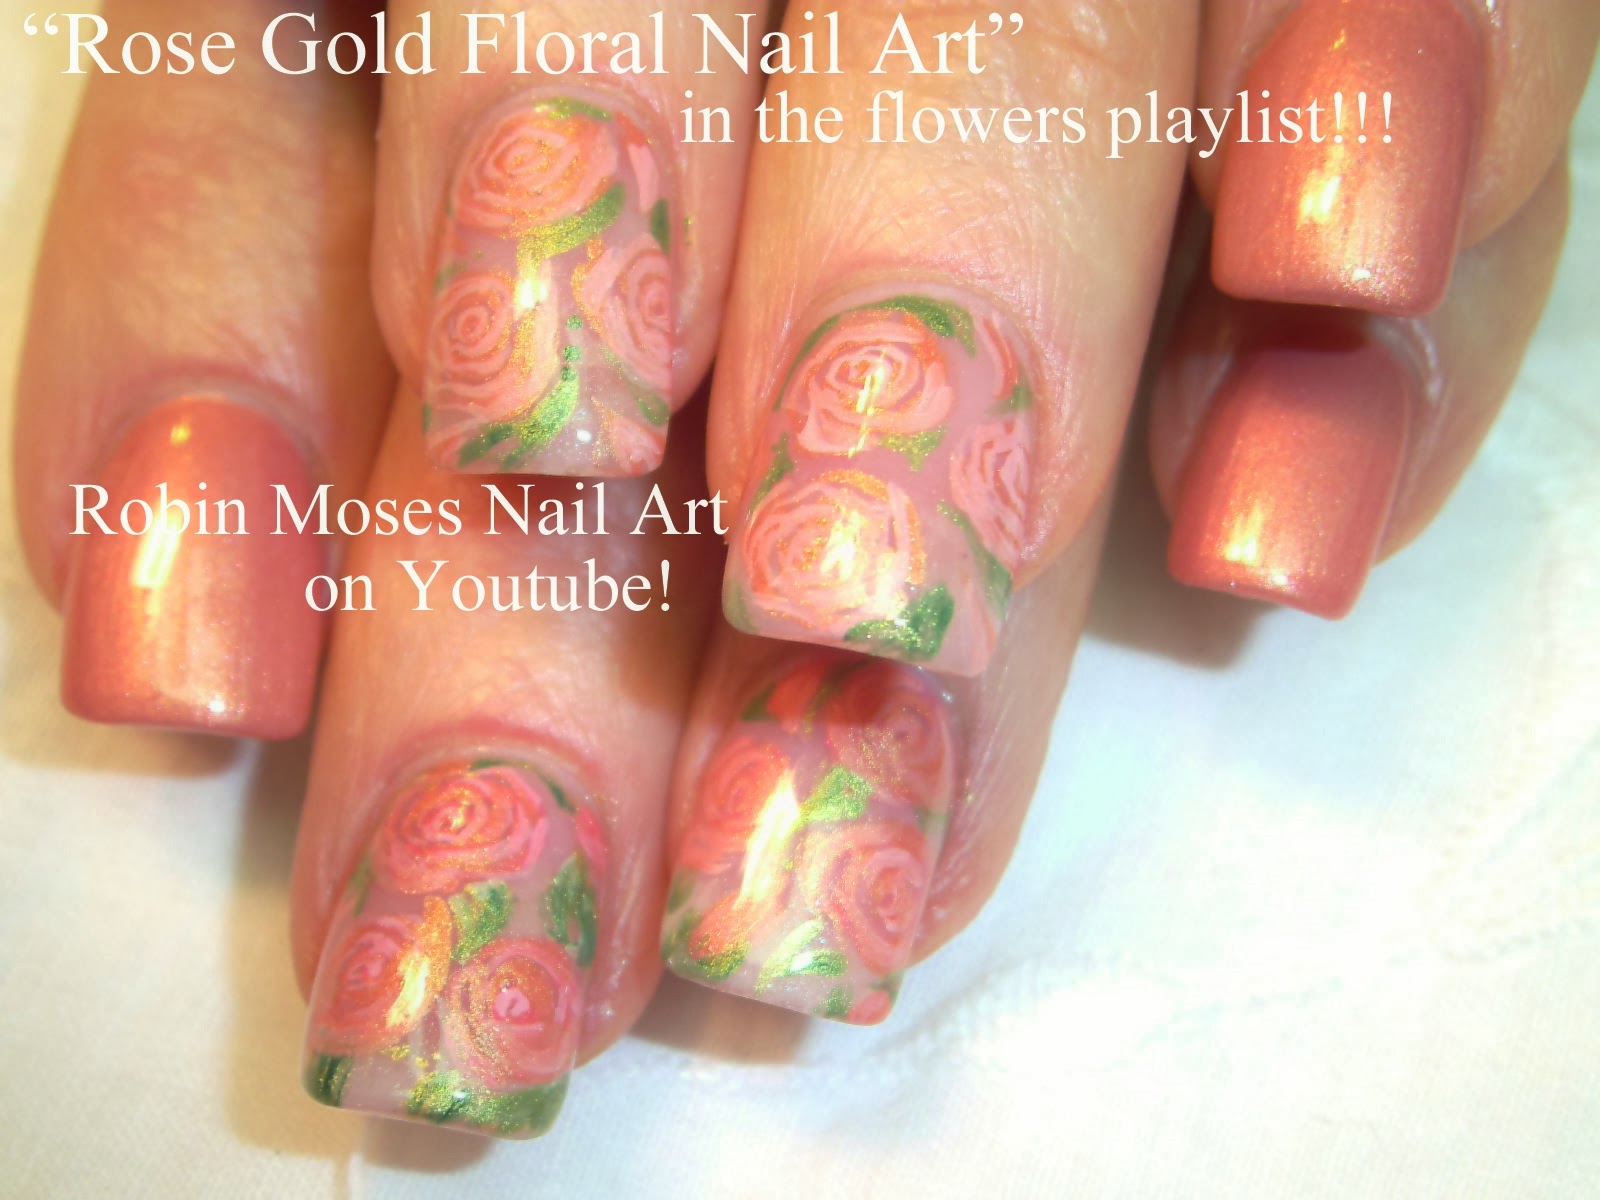 10. Rose Gold and Blush Nail Art - wide 10